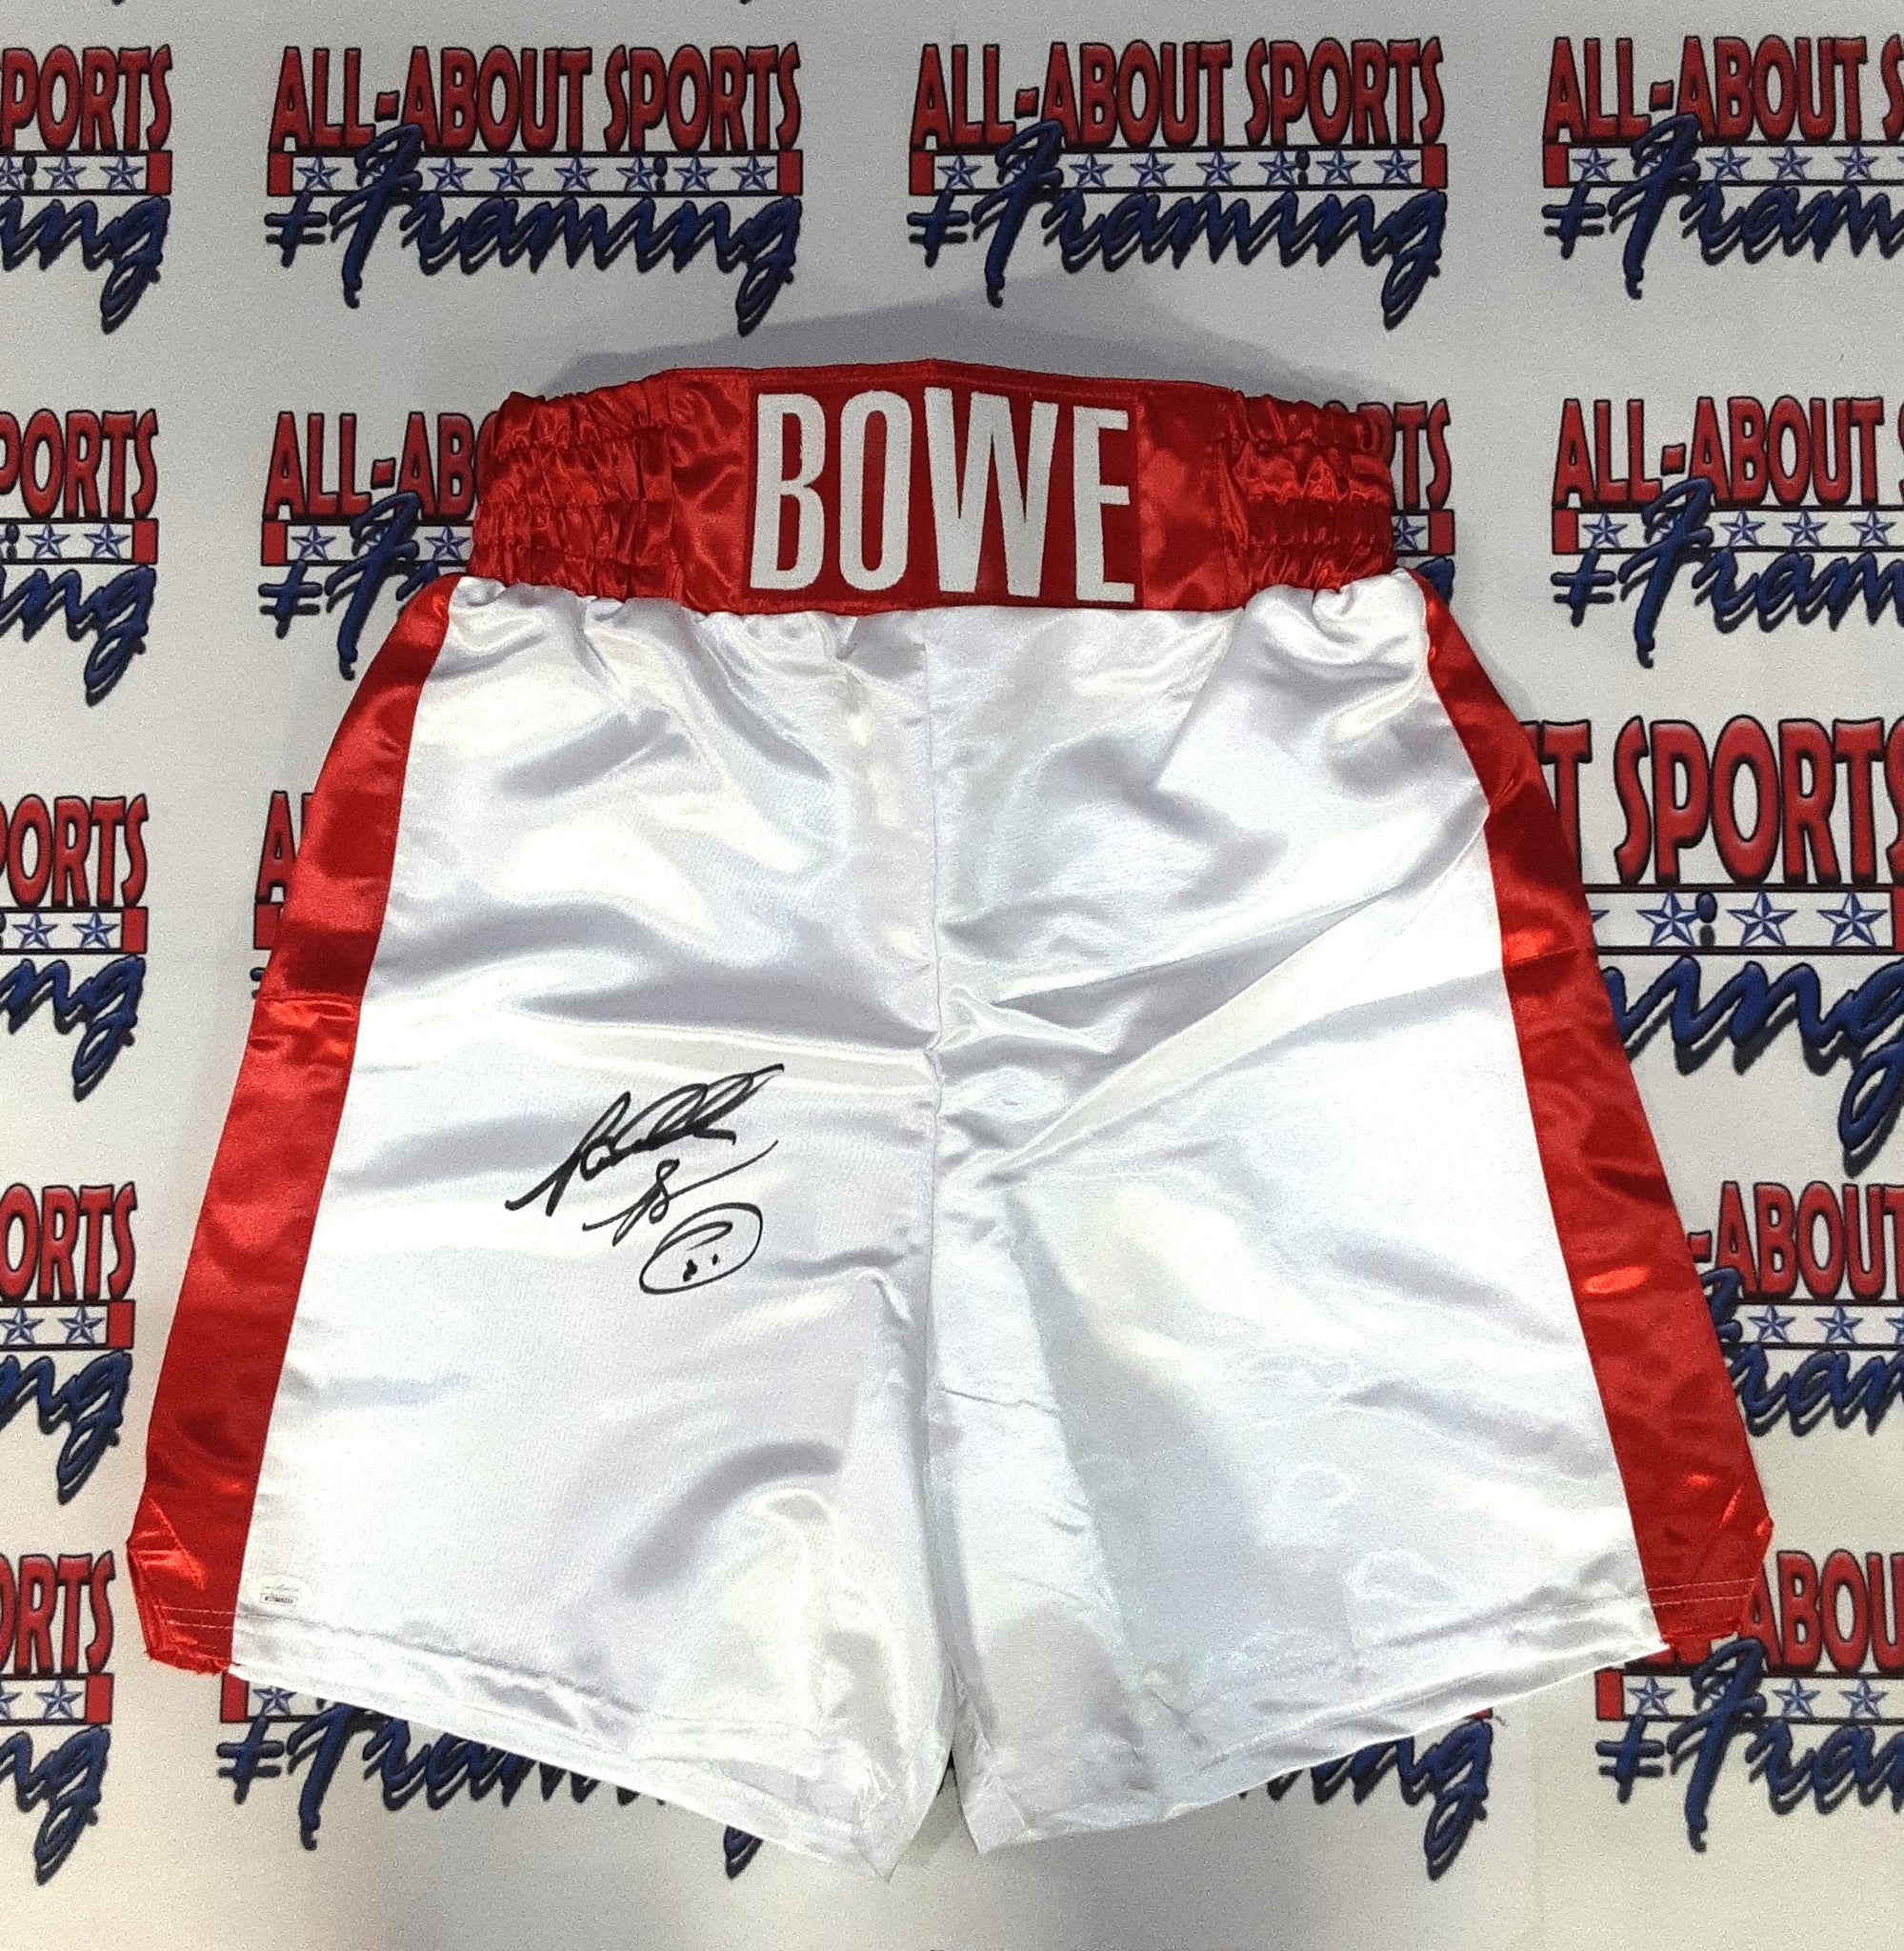 Riddick "Big Daddy" Bowe Authentic Signed Boxing Shorts Autographed JSA-